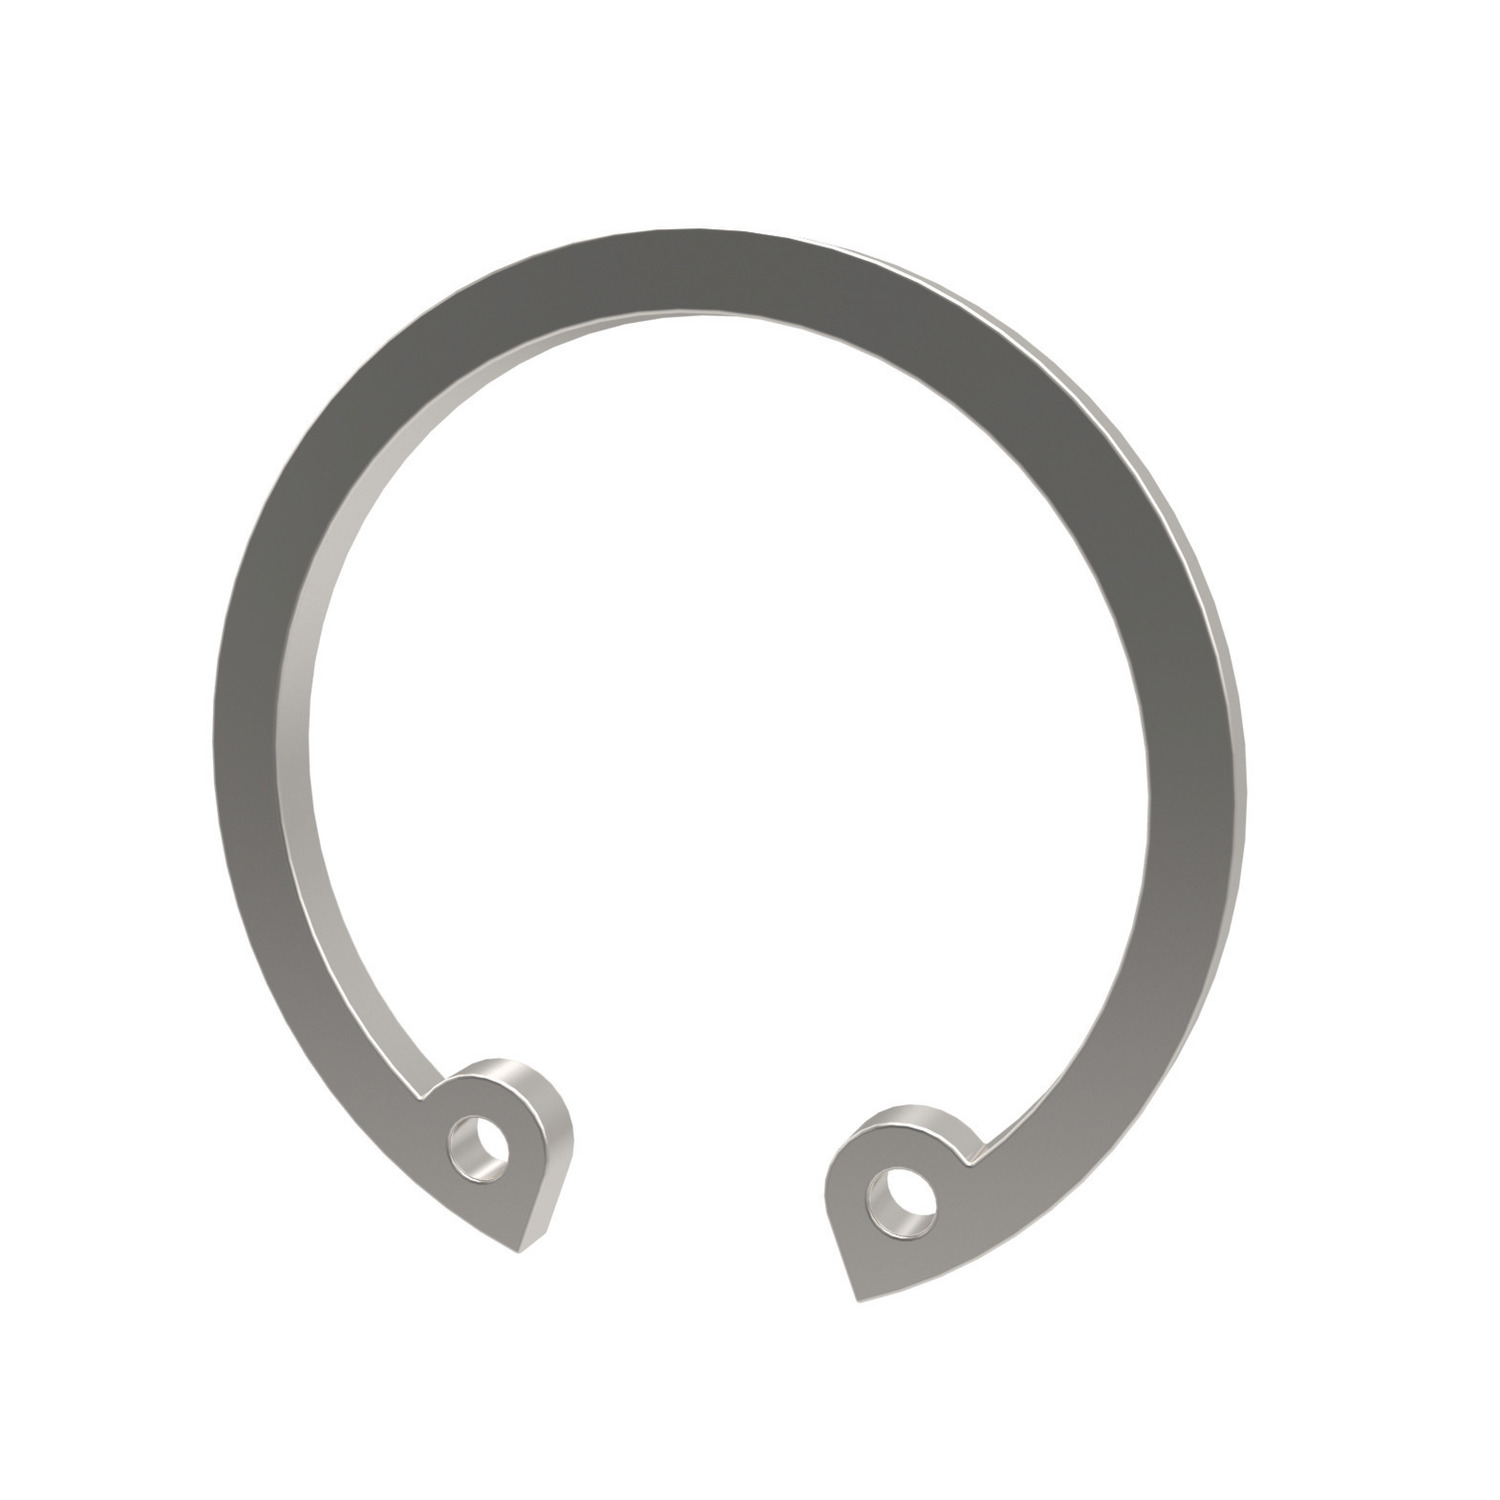 Internal Circlips External circlips in A2 stainless steel. To DIN 472. Diameter 3 to 140mm. For bores.